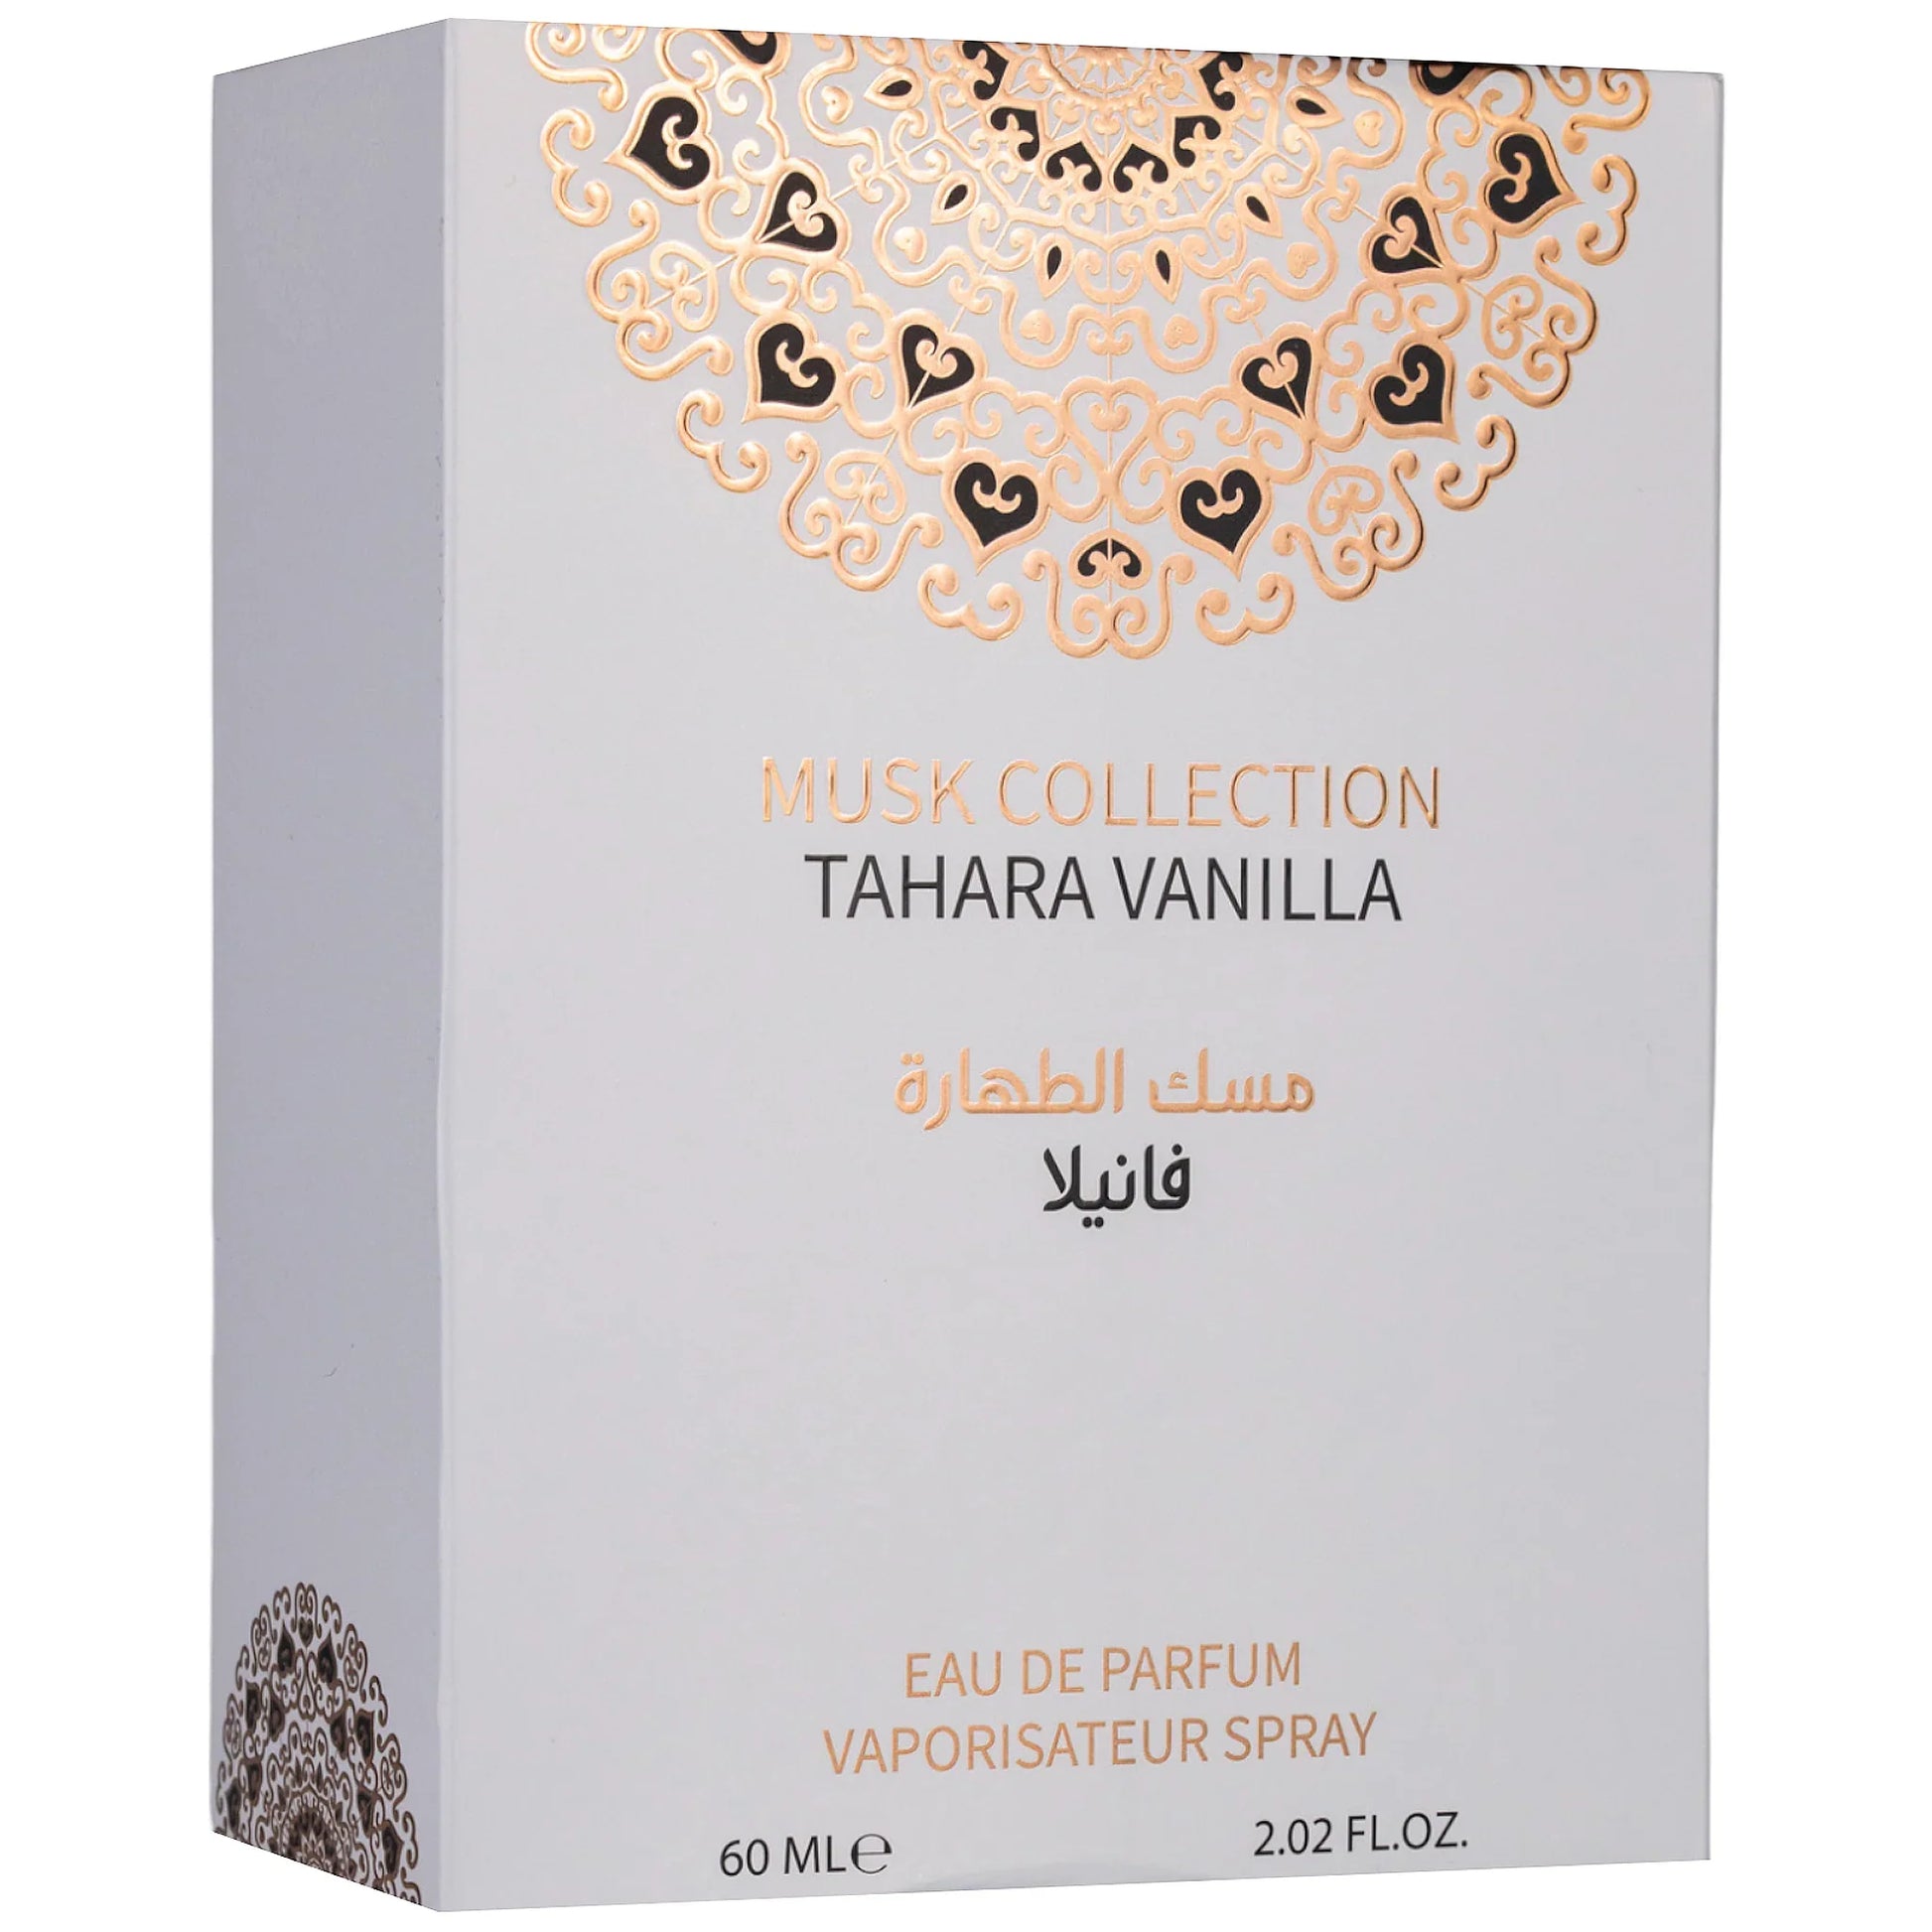  Tahara Vanilla - Musk Collection for Men and Women